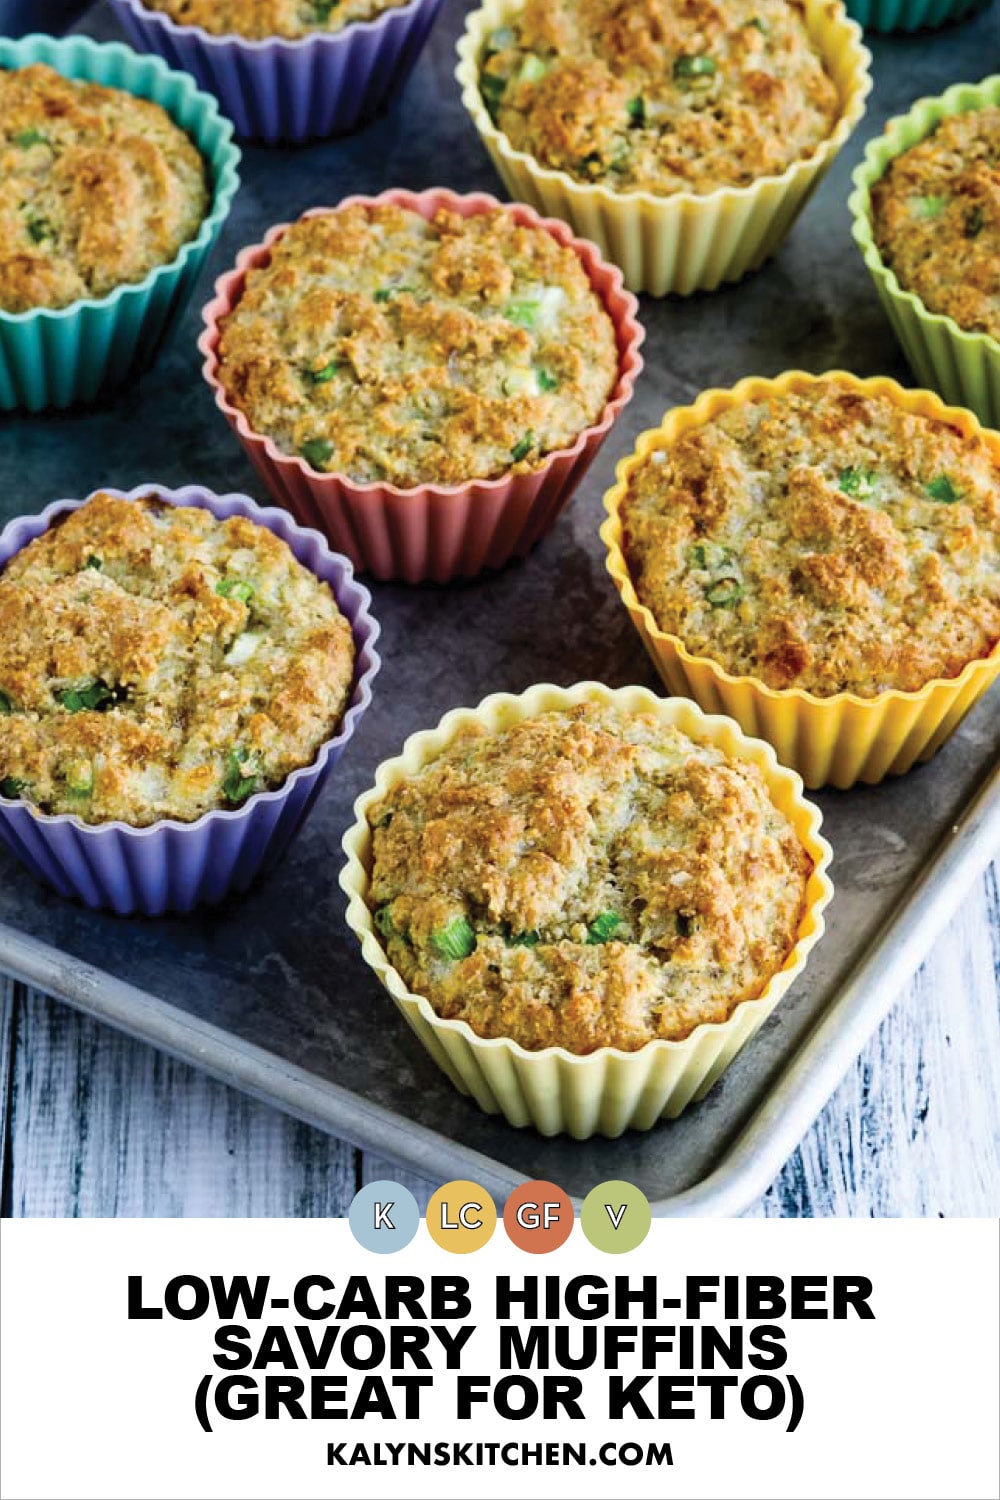 Pinterest image of Low-Carb High-Fiber Savory Muffins